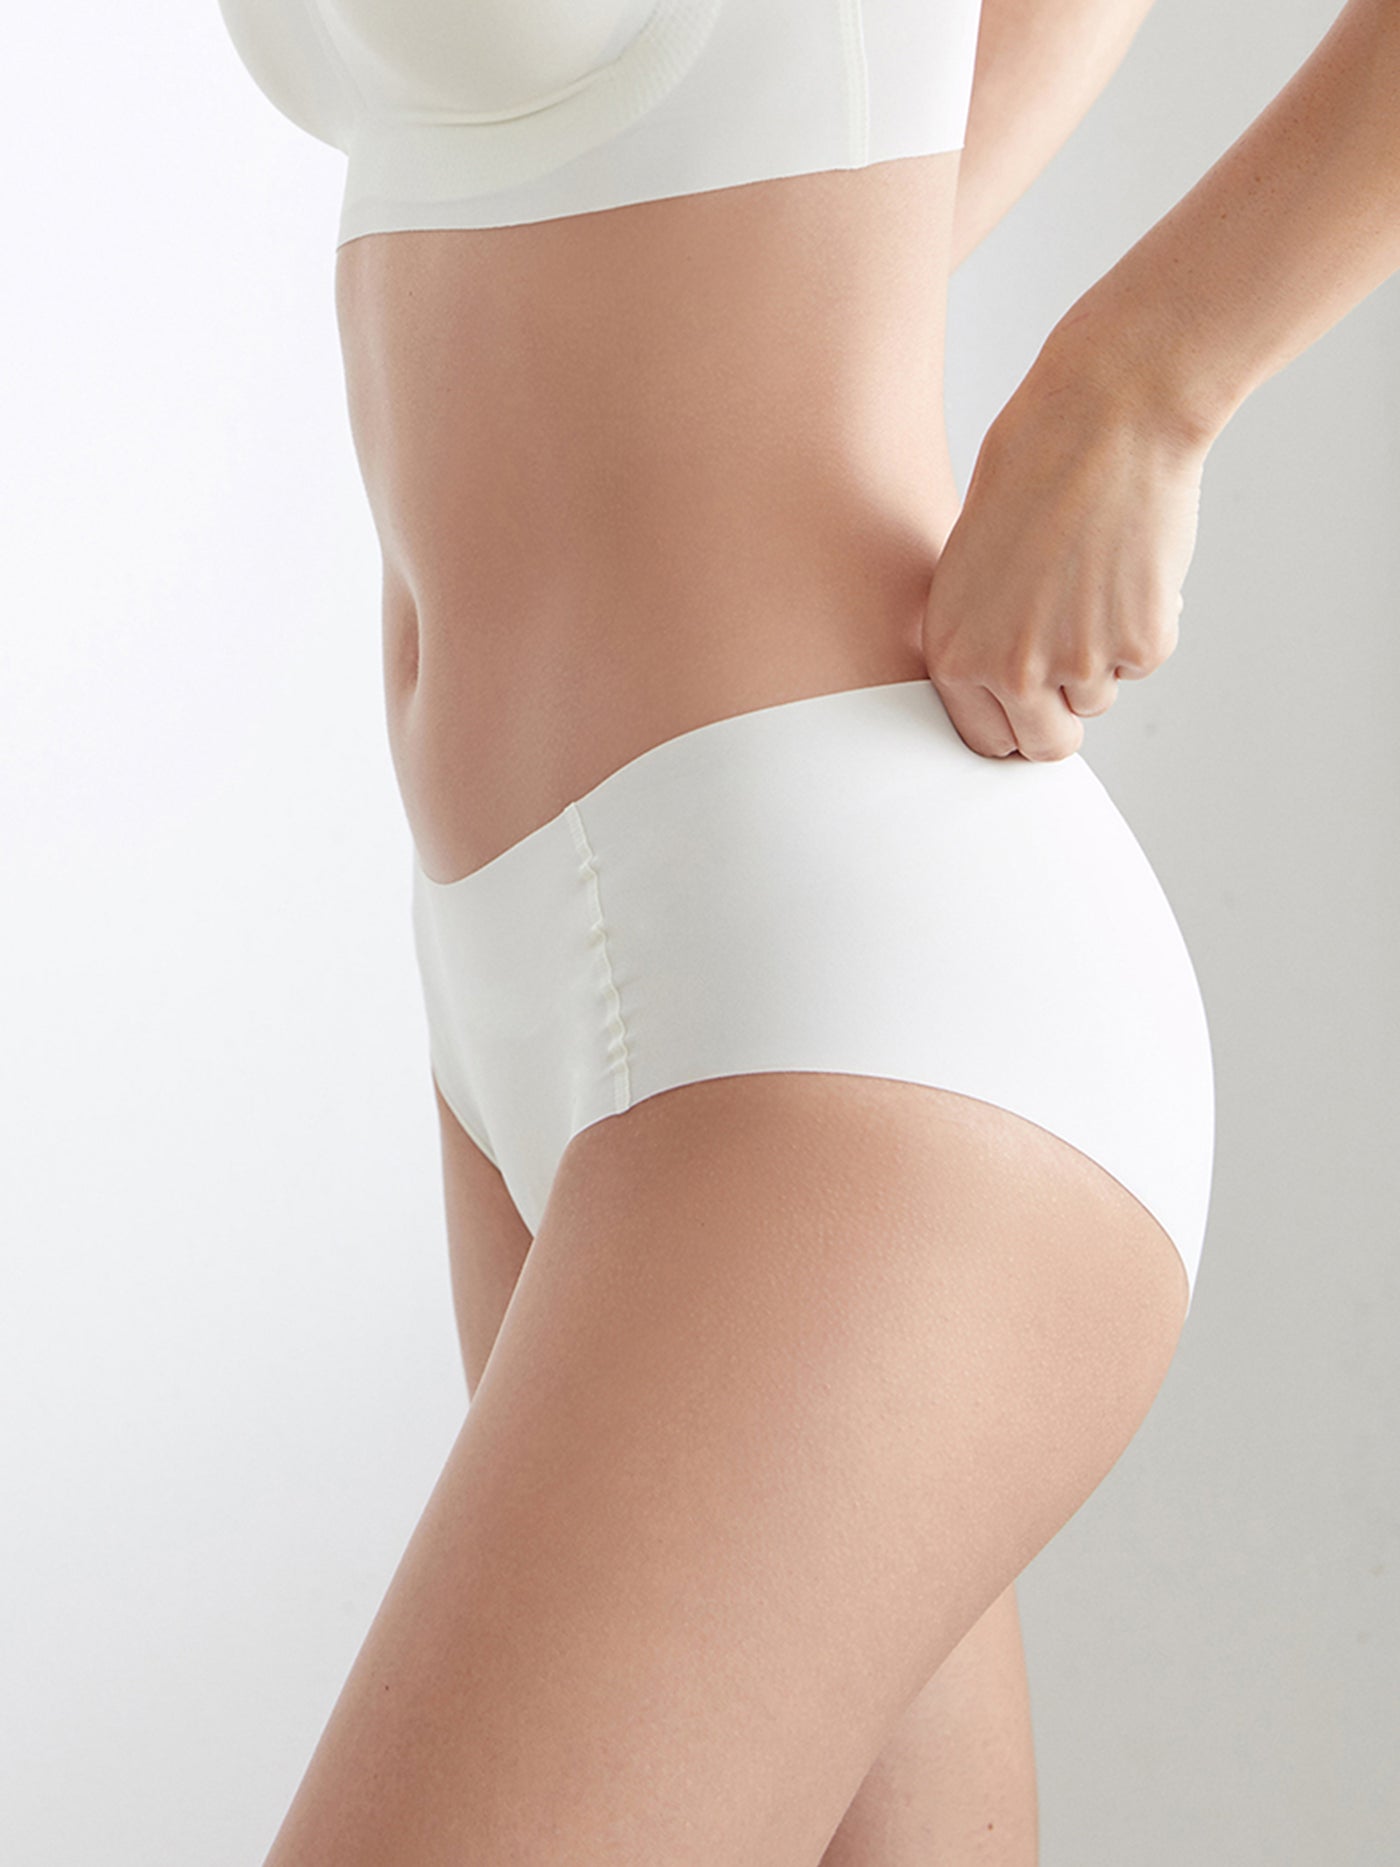 24H Comfort One Size Classic Mid Waist Brief